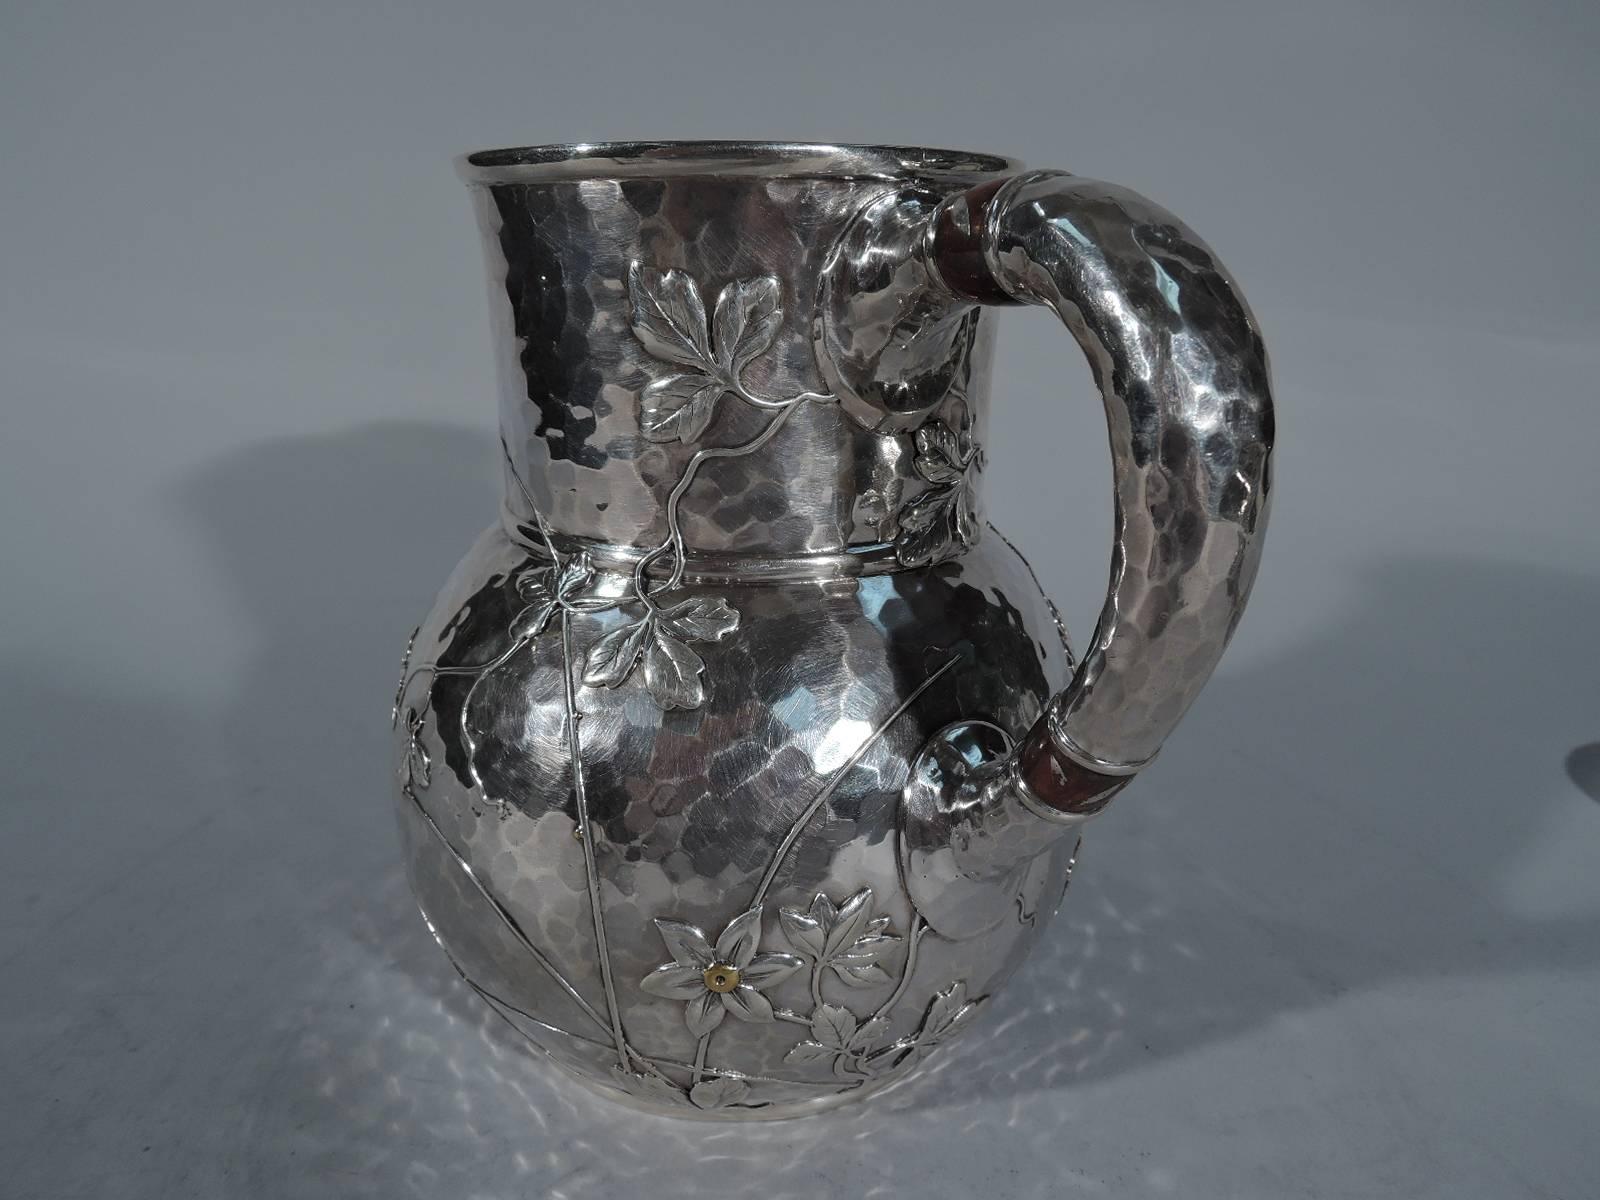 Sterling silver and mixed metal water pitcher. Made by Tiffany & Co. in New York, circa 1885. Globular body, straight neck and C-scroll handle. All-over honeycomb hand hammering. Applied flowers, leafing tendrils and butterflies. A restrained design